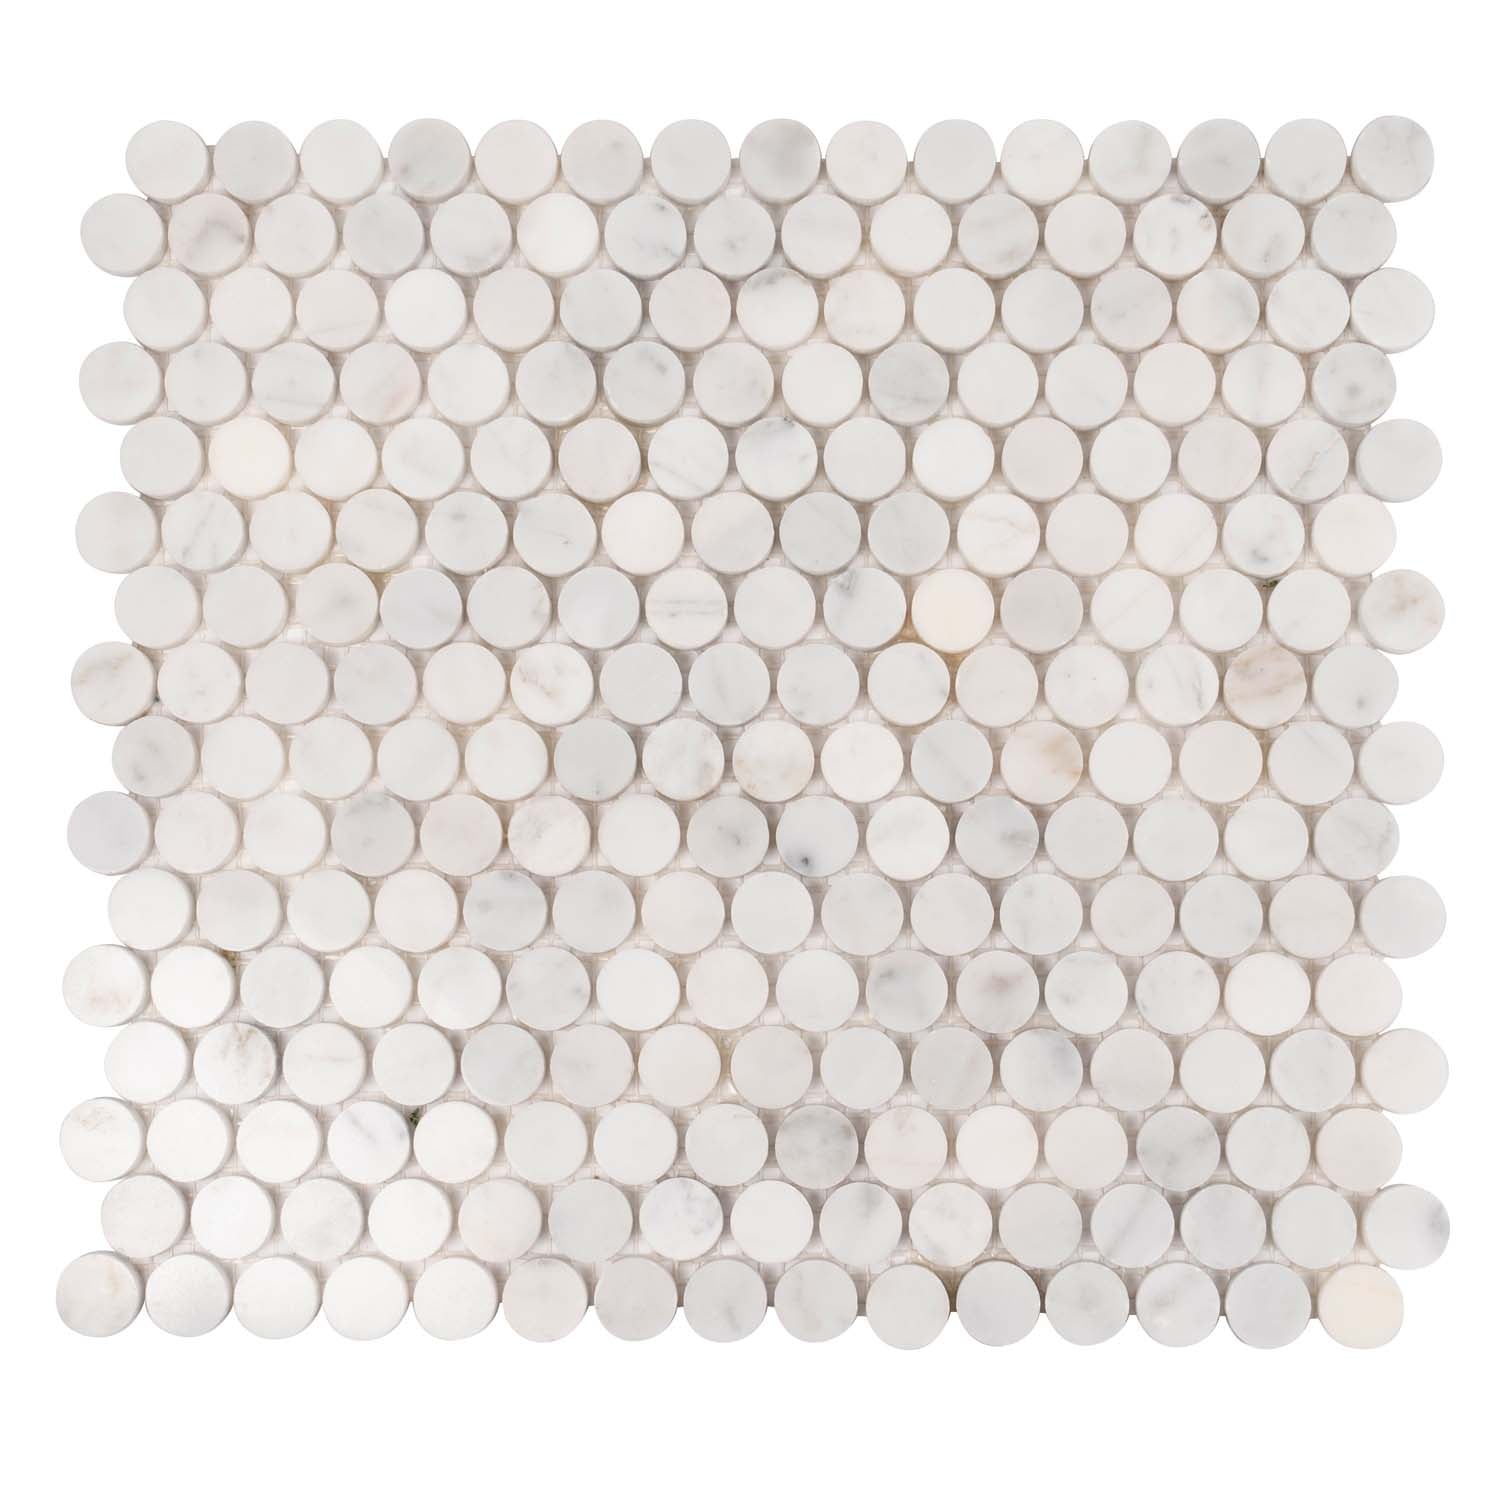 White and Gray Penny Tile